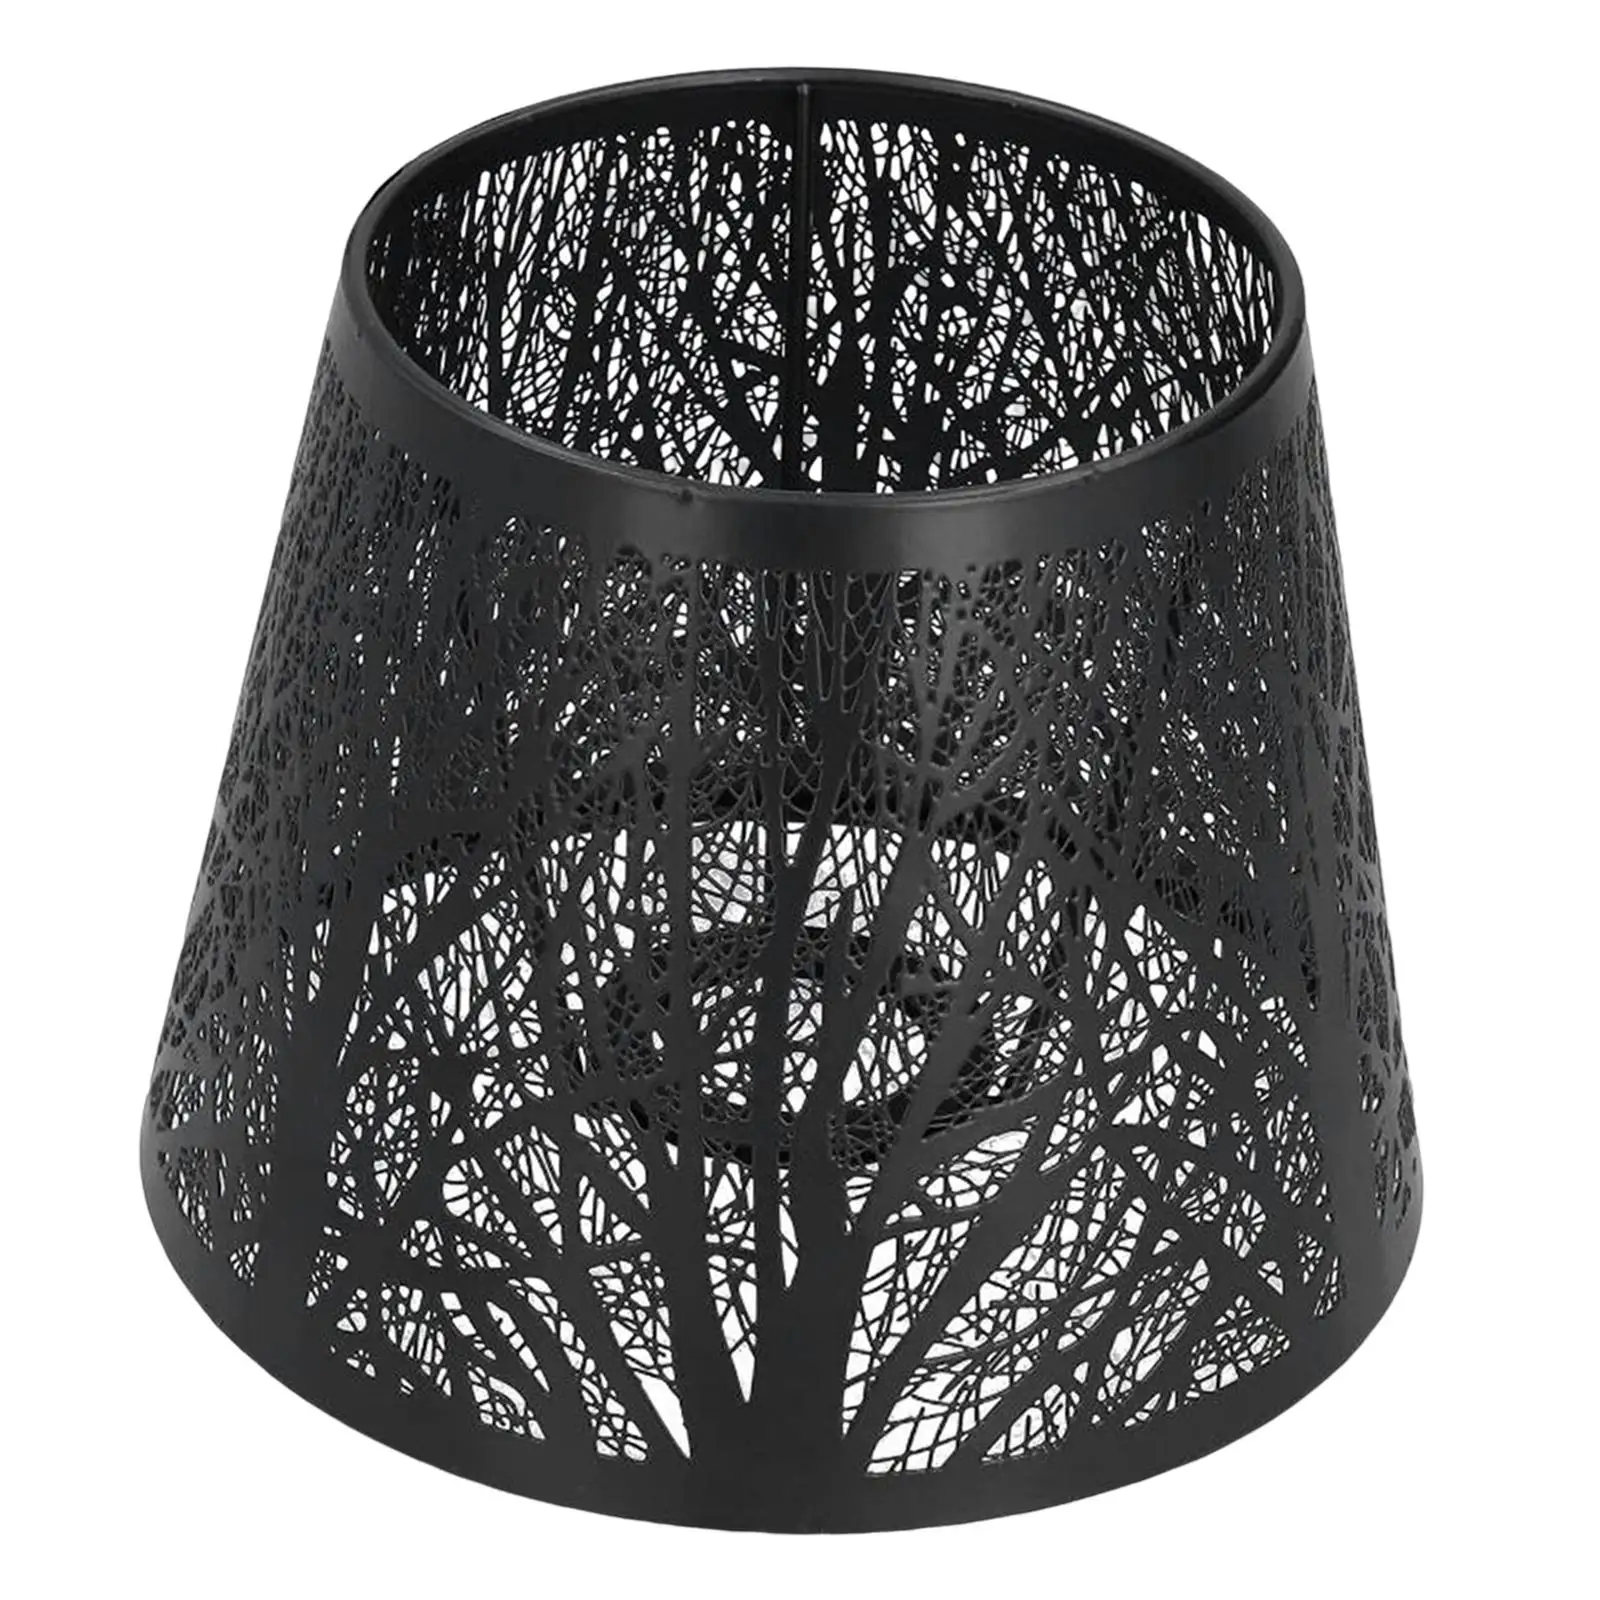 Modern Minimalist Lamp Shade Tree Shadow Metal Cage Light Cover Decorative for Table Lamp Teahouse Office NightStand Bedside